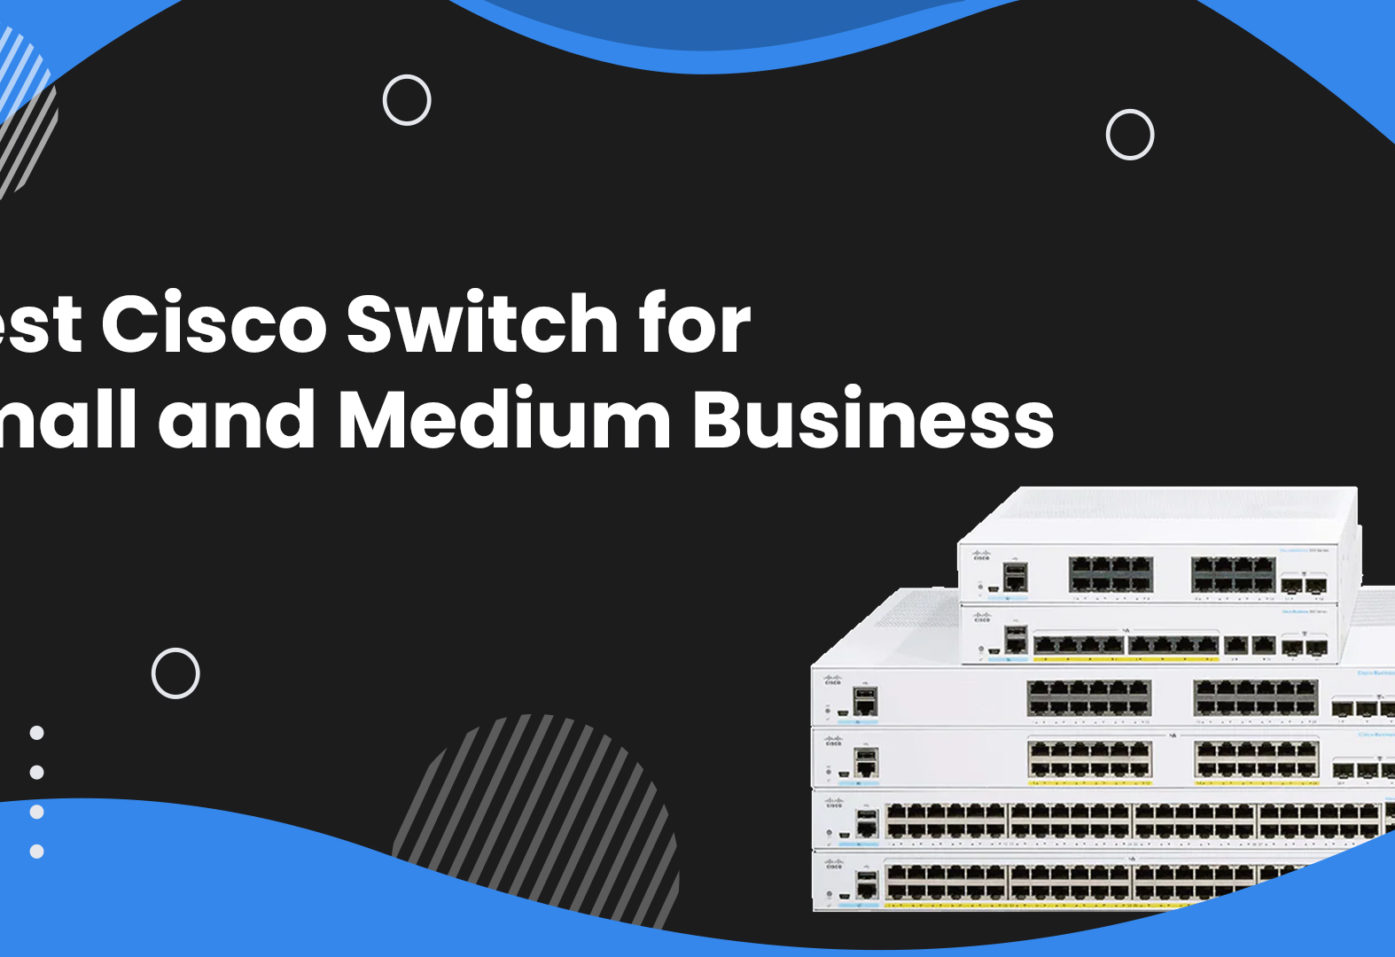 Best Cisco Switch for Small and Medium Business